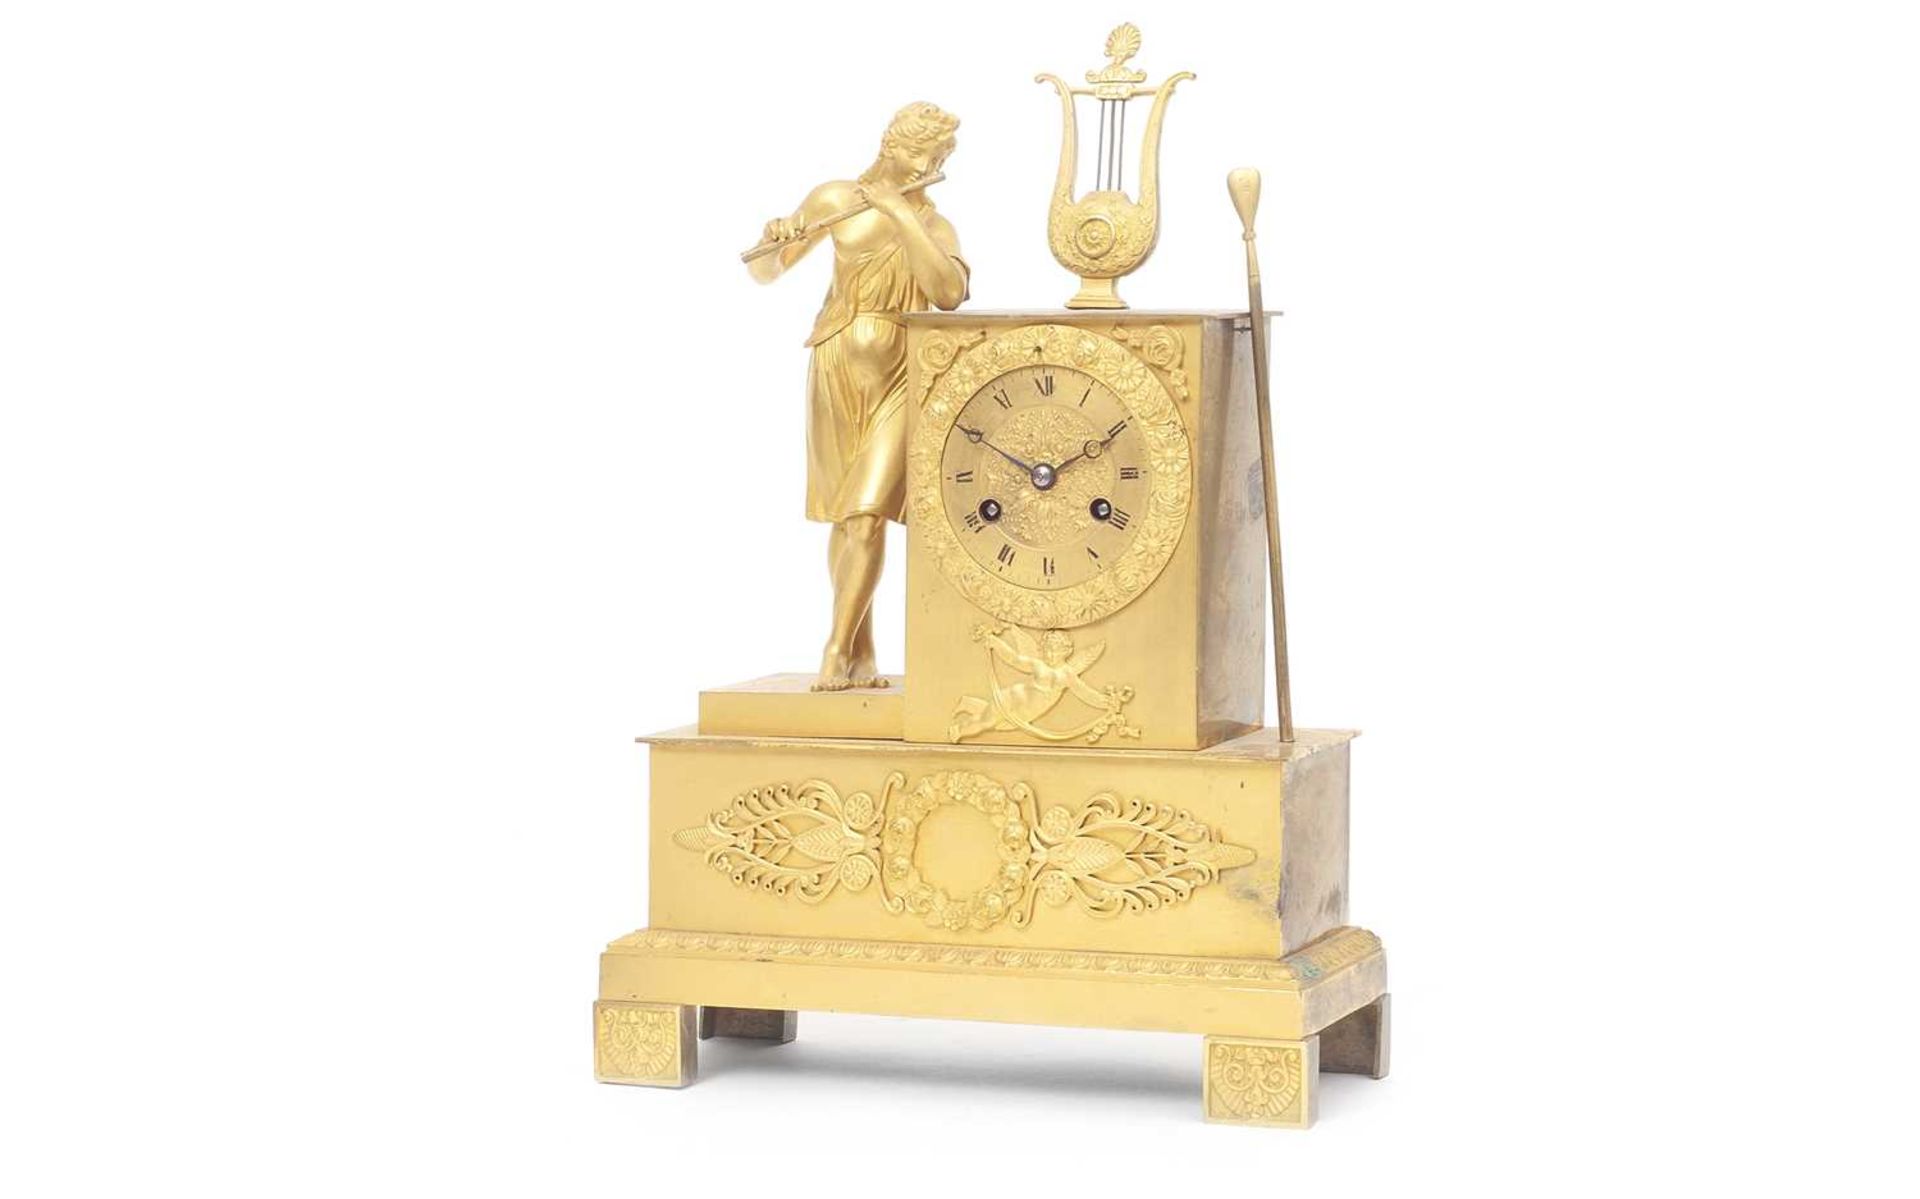 AN EARLY 19TH CENTURY EMPIRE PERIOD GILT BRONZE MANTEL CLOCK - Image 2 of 3